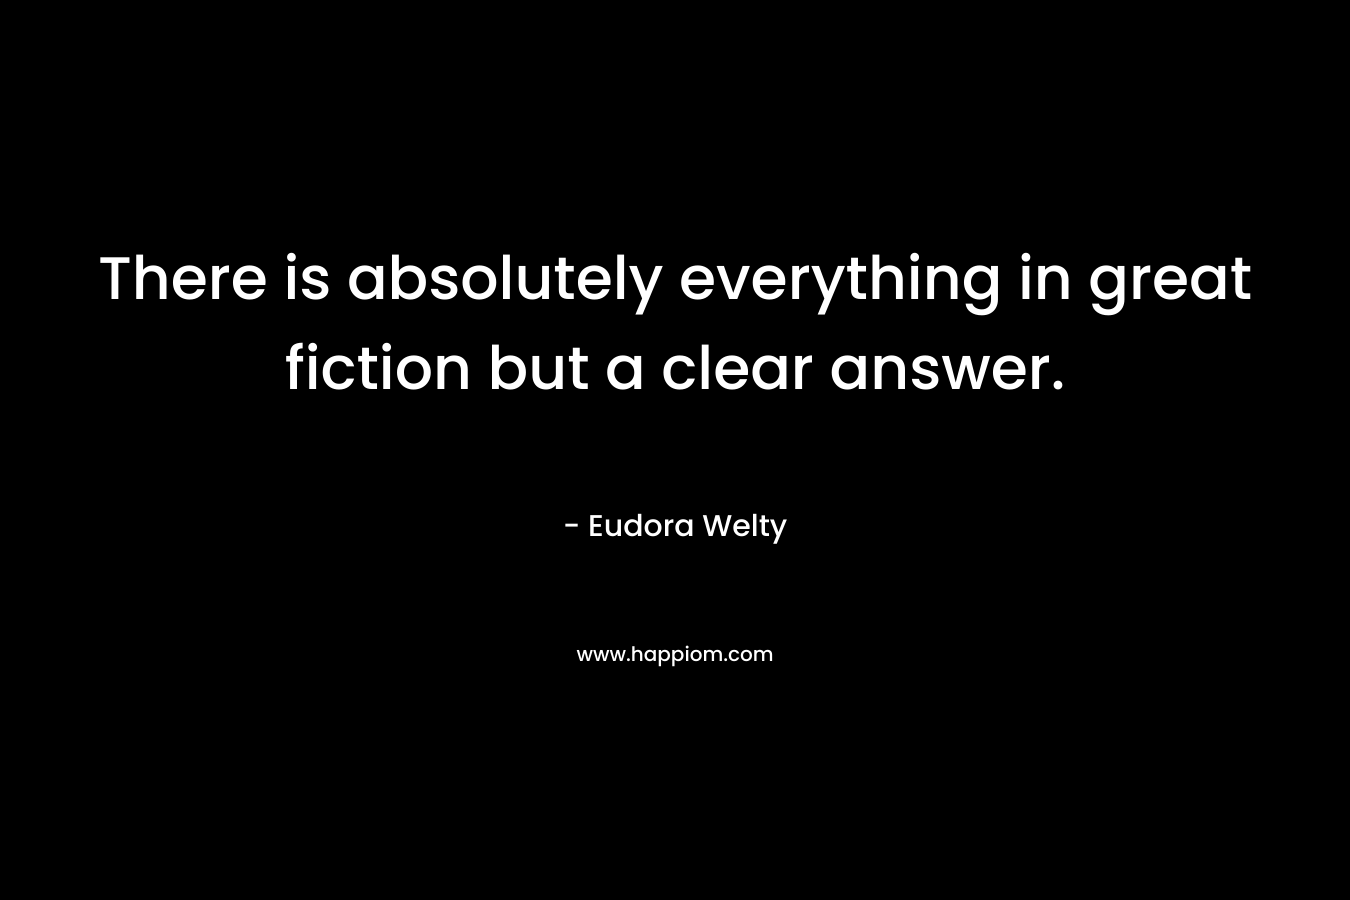 There is absolutely everything in great fiction but a clear answer.